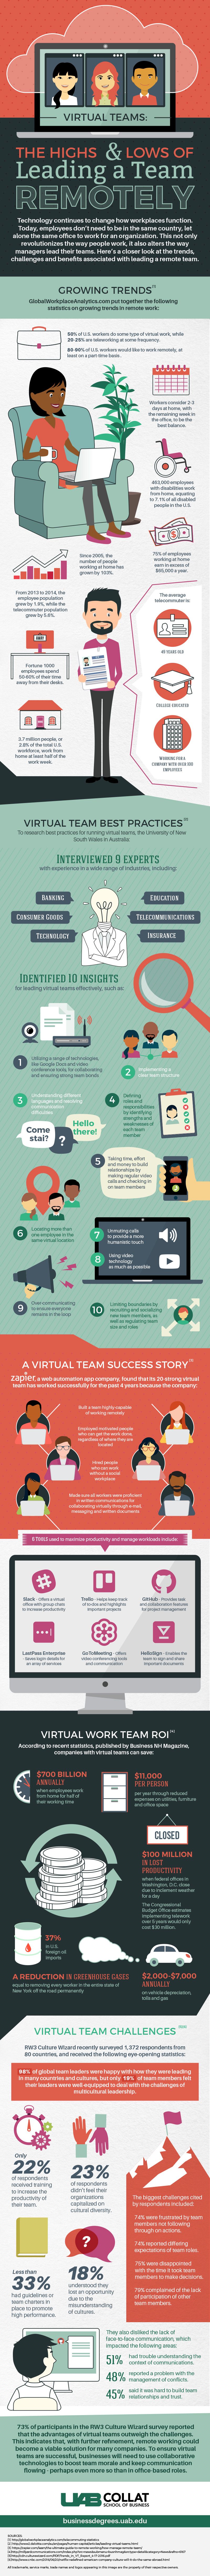 An infographic about remote team leadership by UAB Collat School of Business.